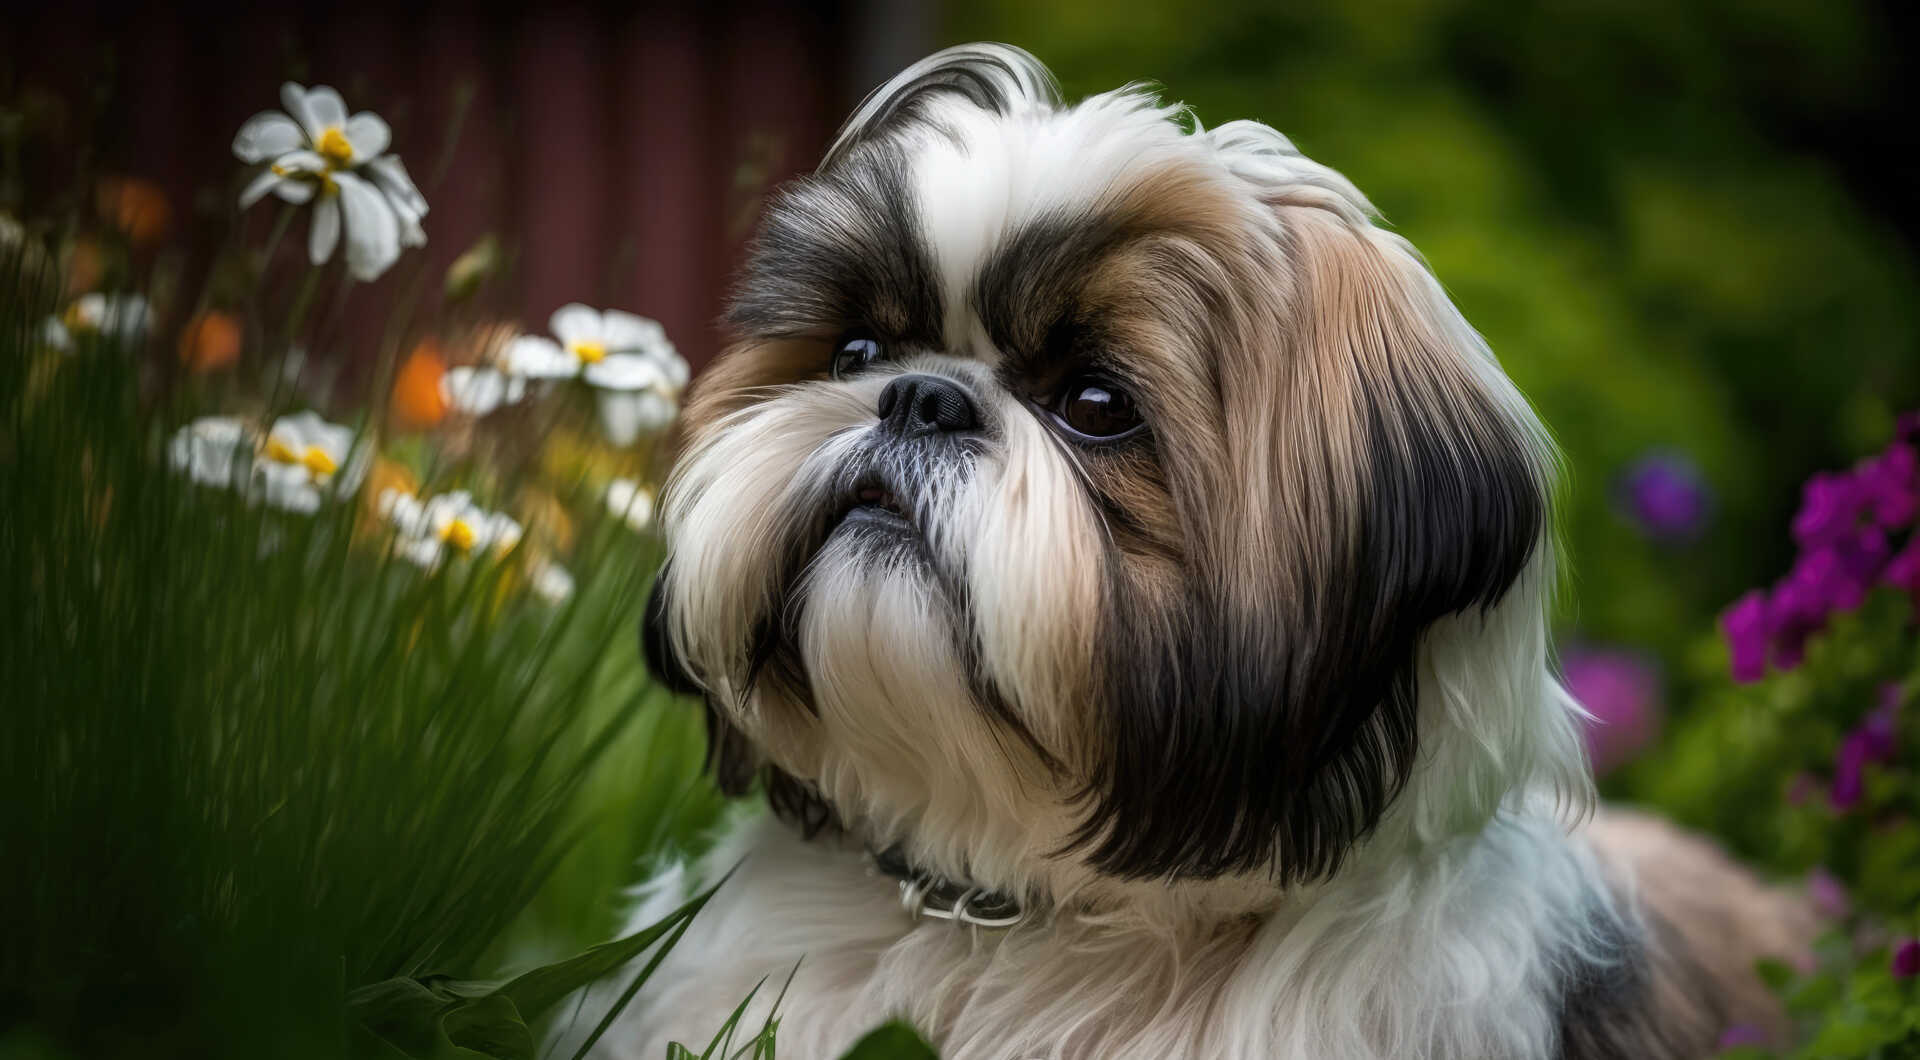 10 dog breeds that get along well with cats | LhasaLife